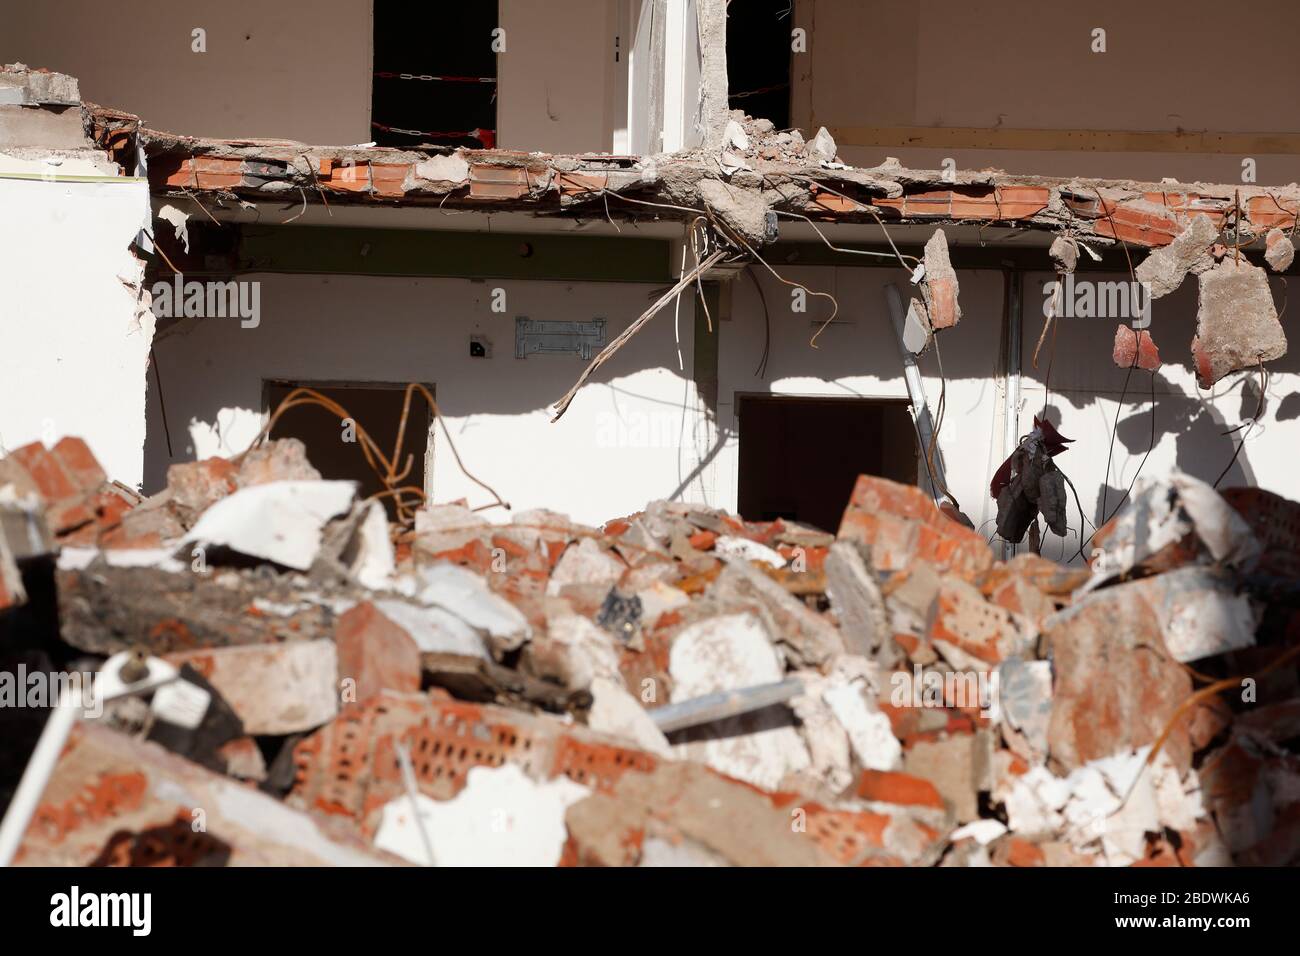 House demolition, remains of walls and debris from a demolished house, Bremen, Germany, Europe Stock Photo